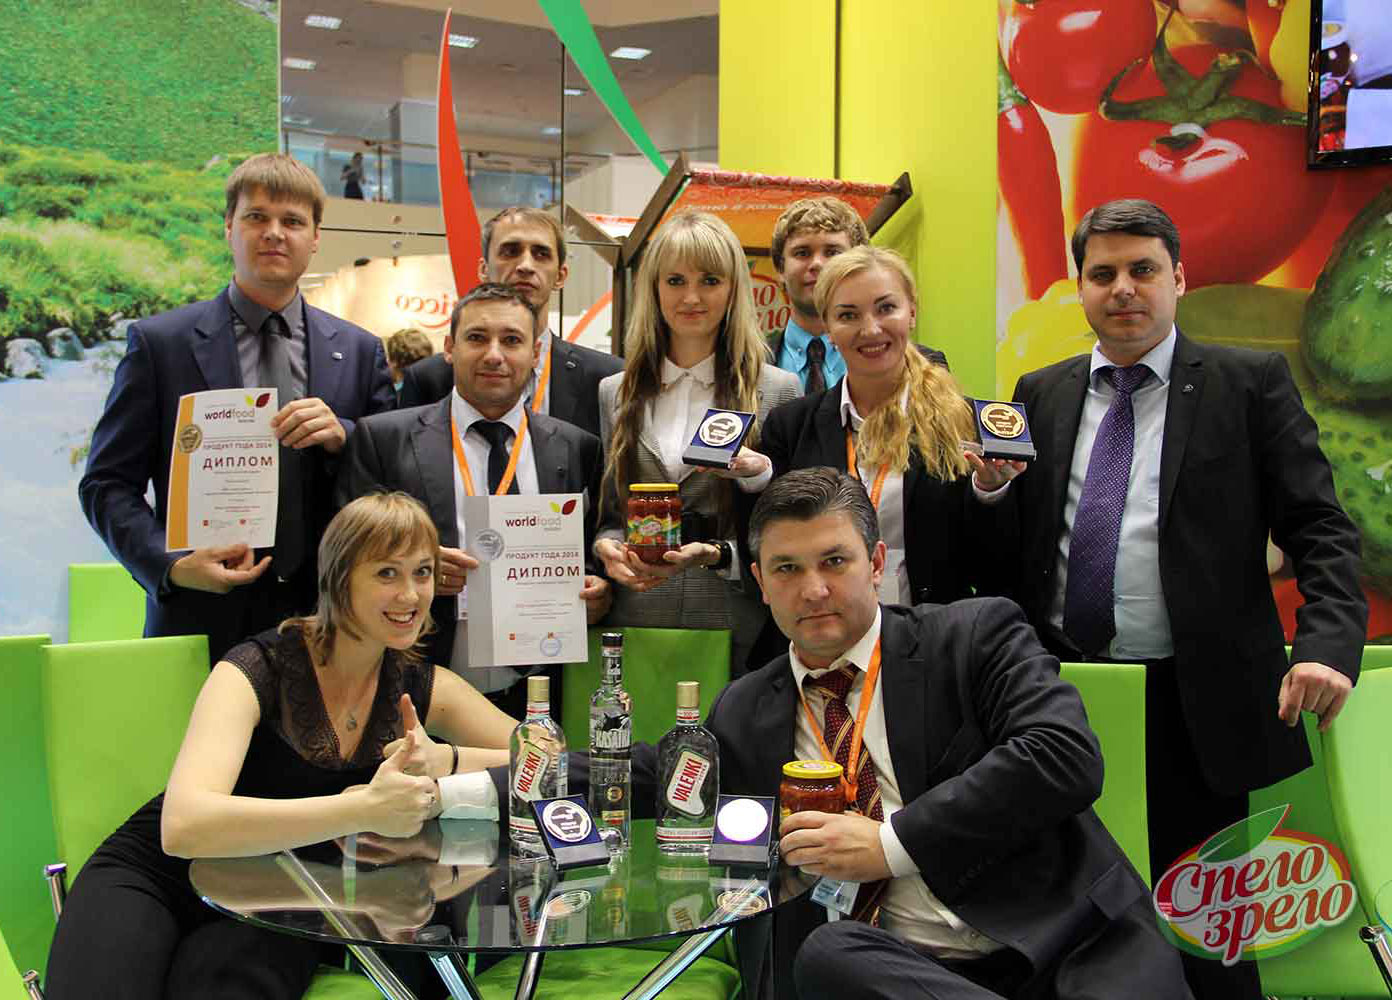 "SPELO-ZRELO" - "Product of the Year 2014" at the exhibition "World Food Moscow 2014"